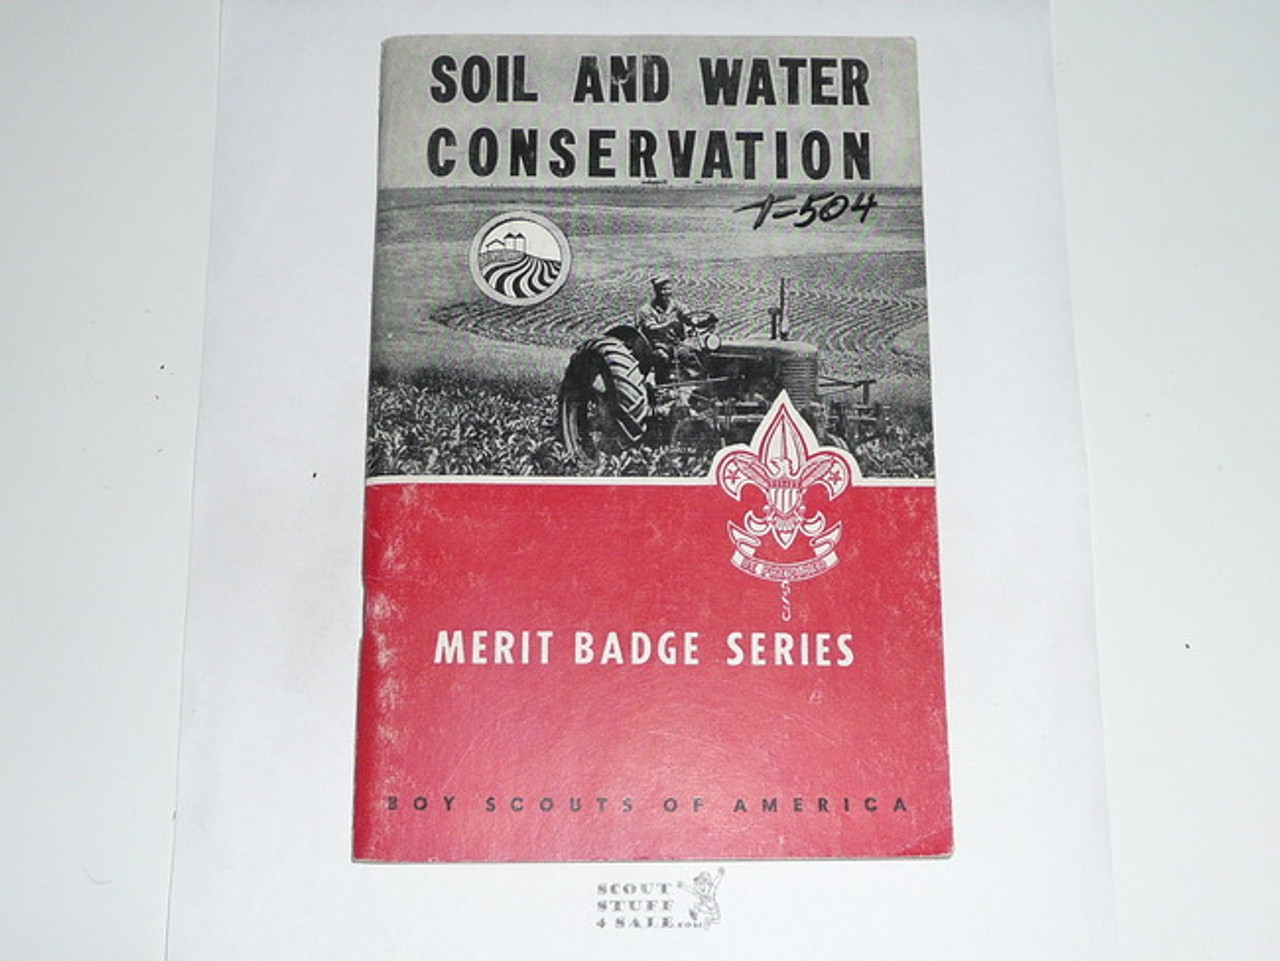 Soil and Water Conservation Merit Badge Pamphlet, Type 6, Picture Top Red Bottom Cover, 1-65 Printing